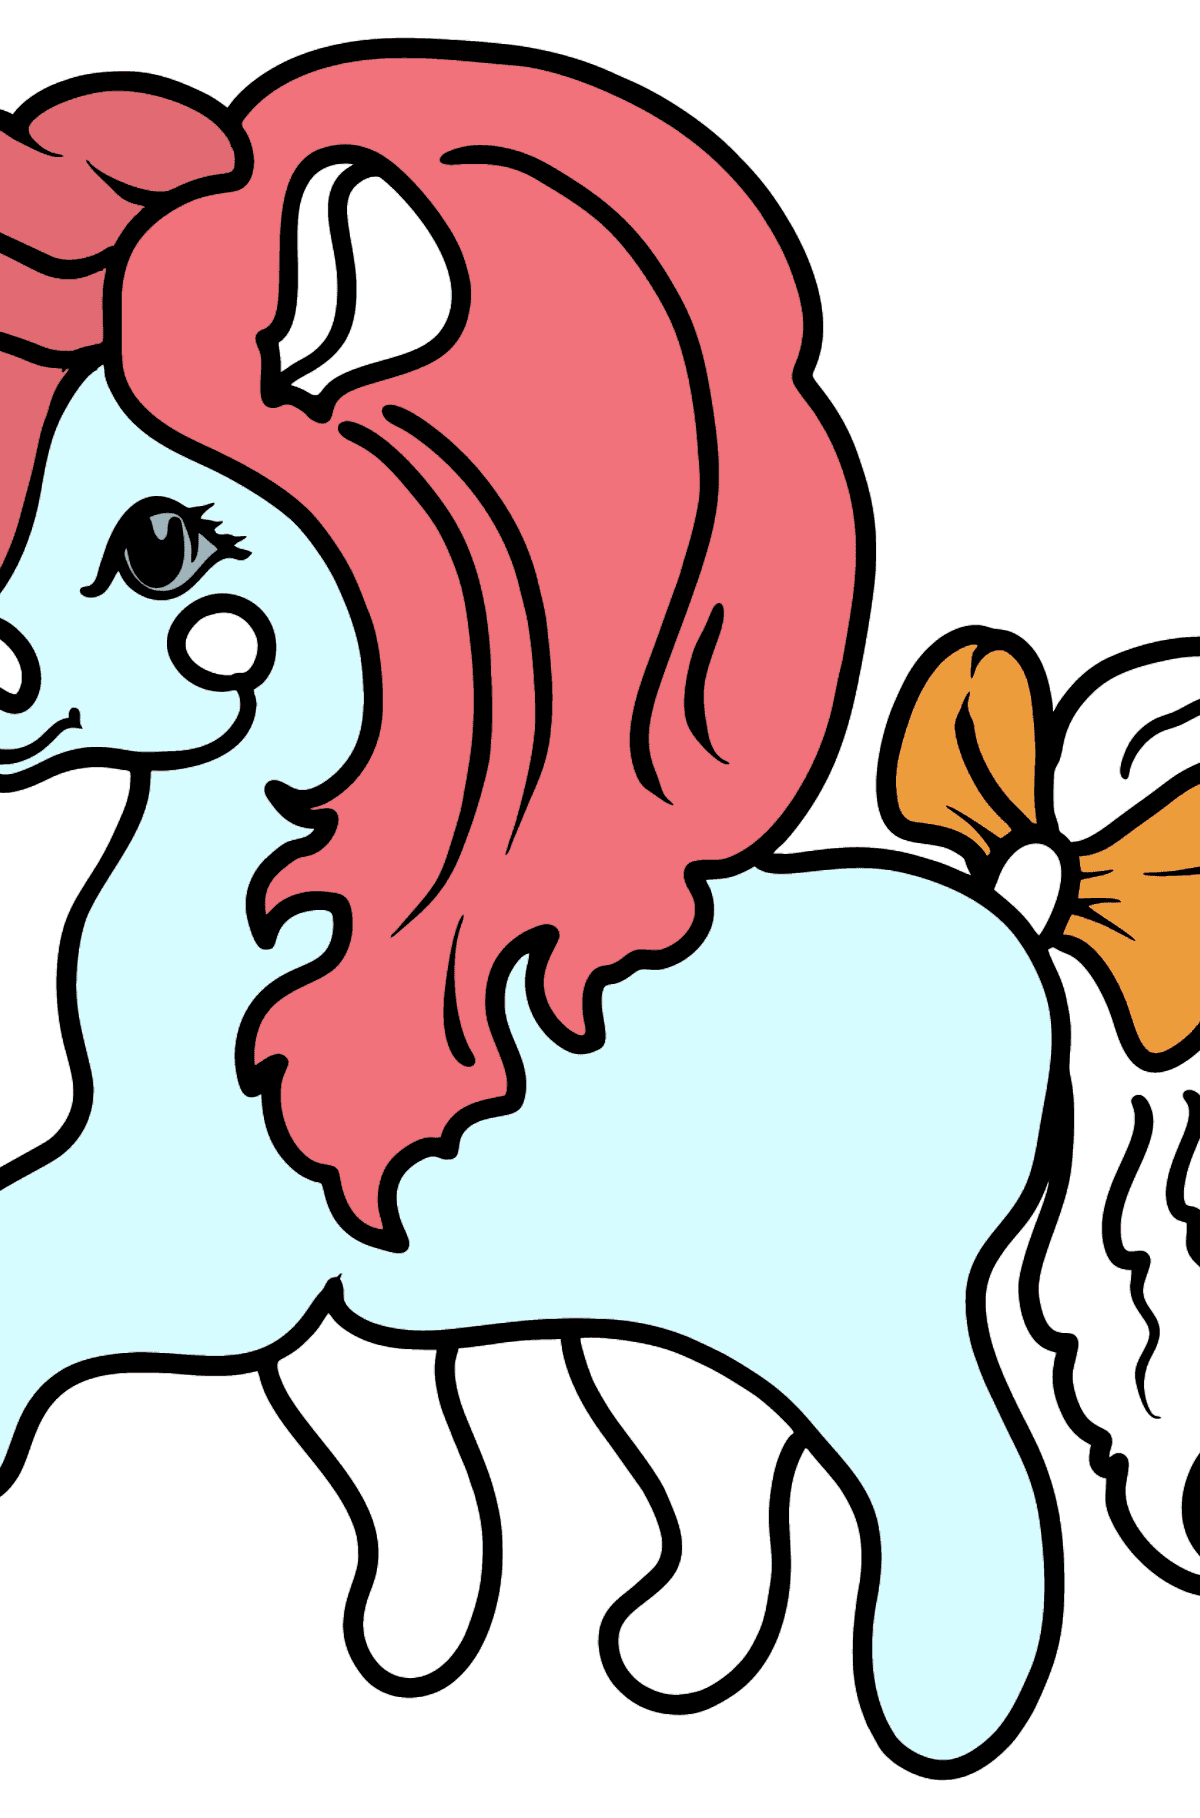 Tinesha Pony coloring page - Coloring Pages for Kids